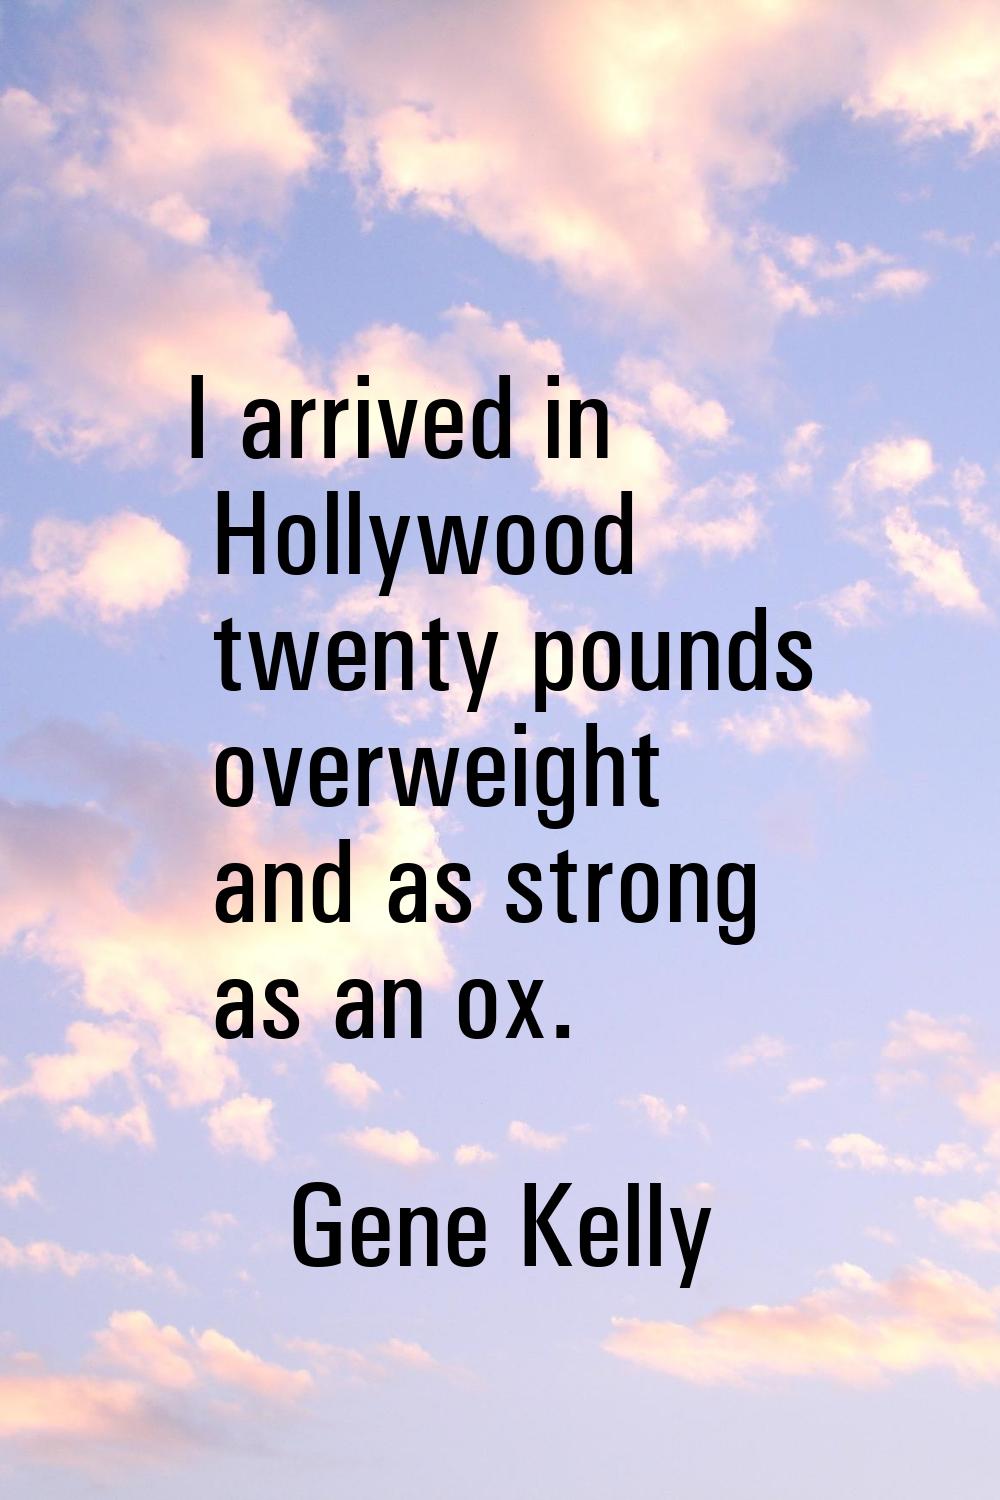 I arrived in Hollywood twenty pounds overweight and as strong as an ox.